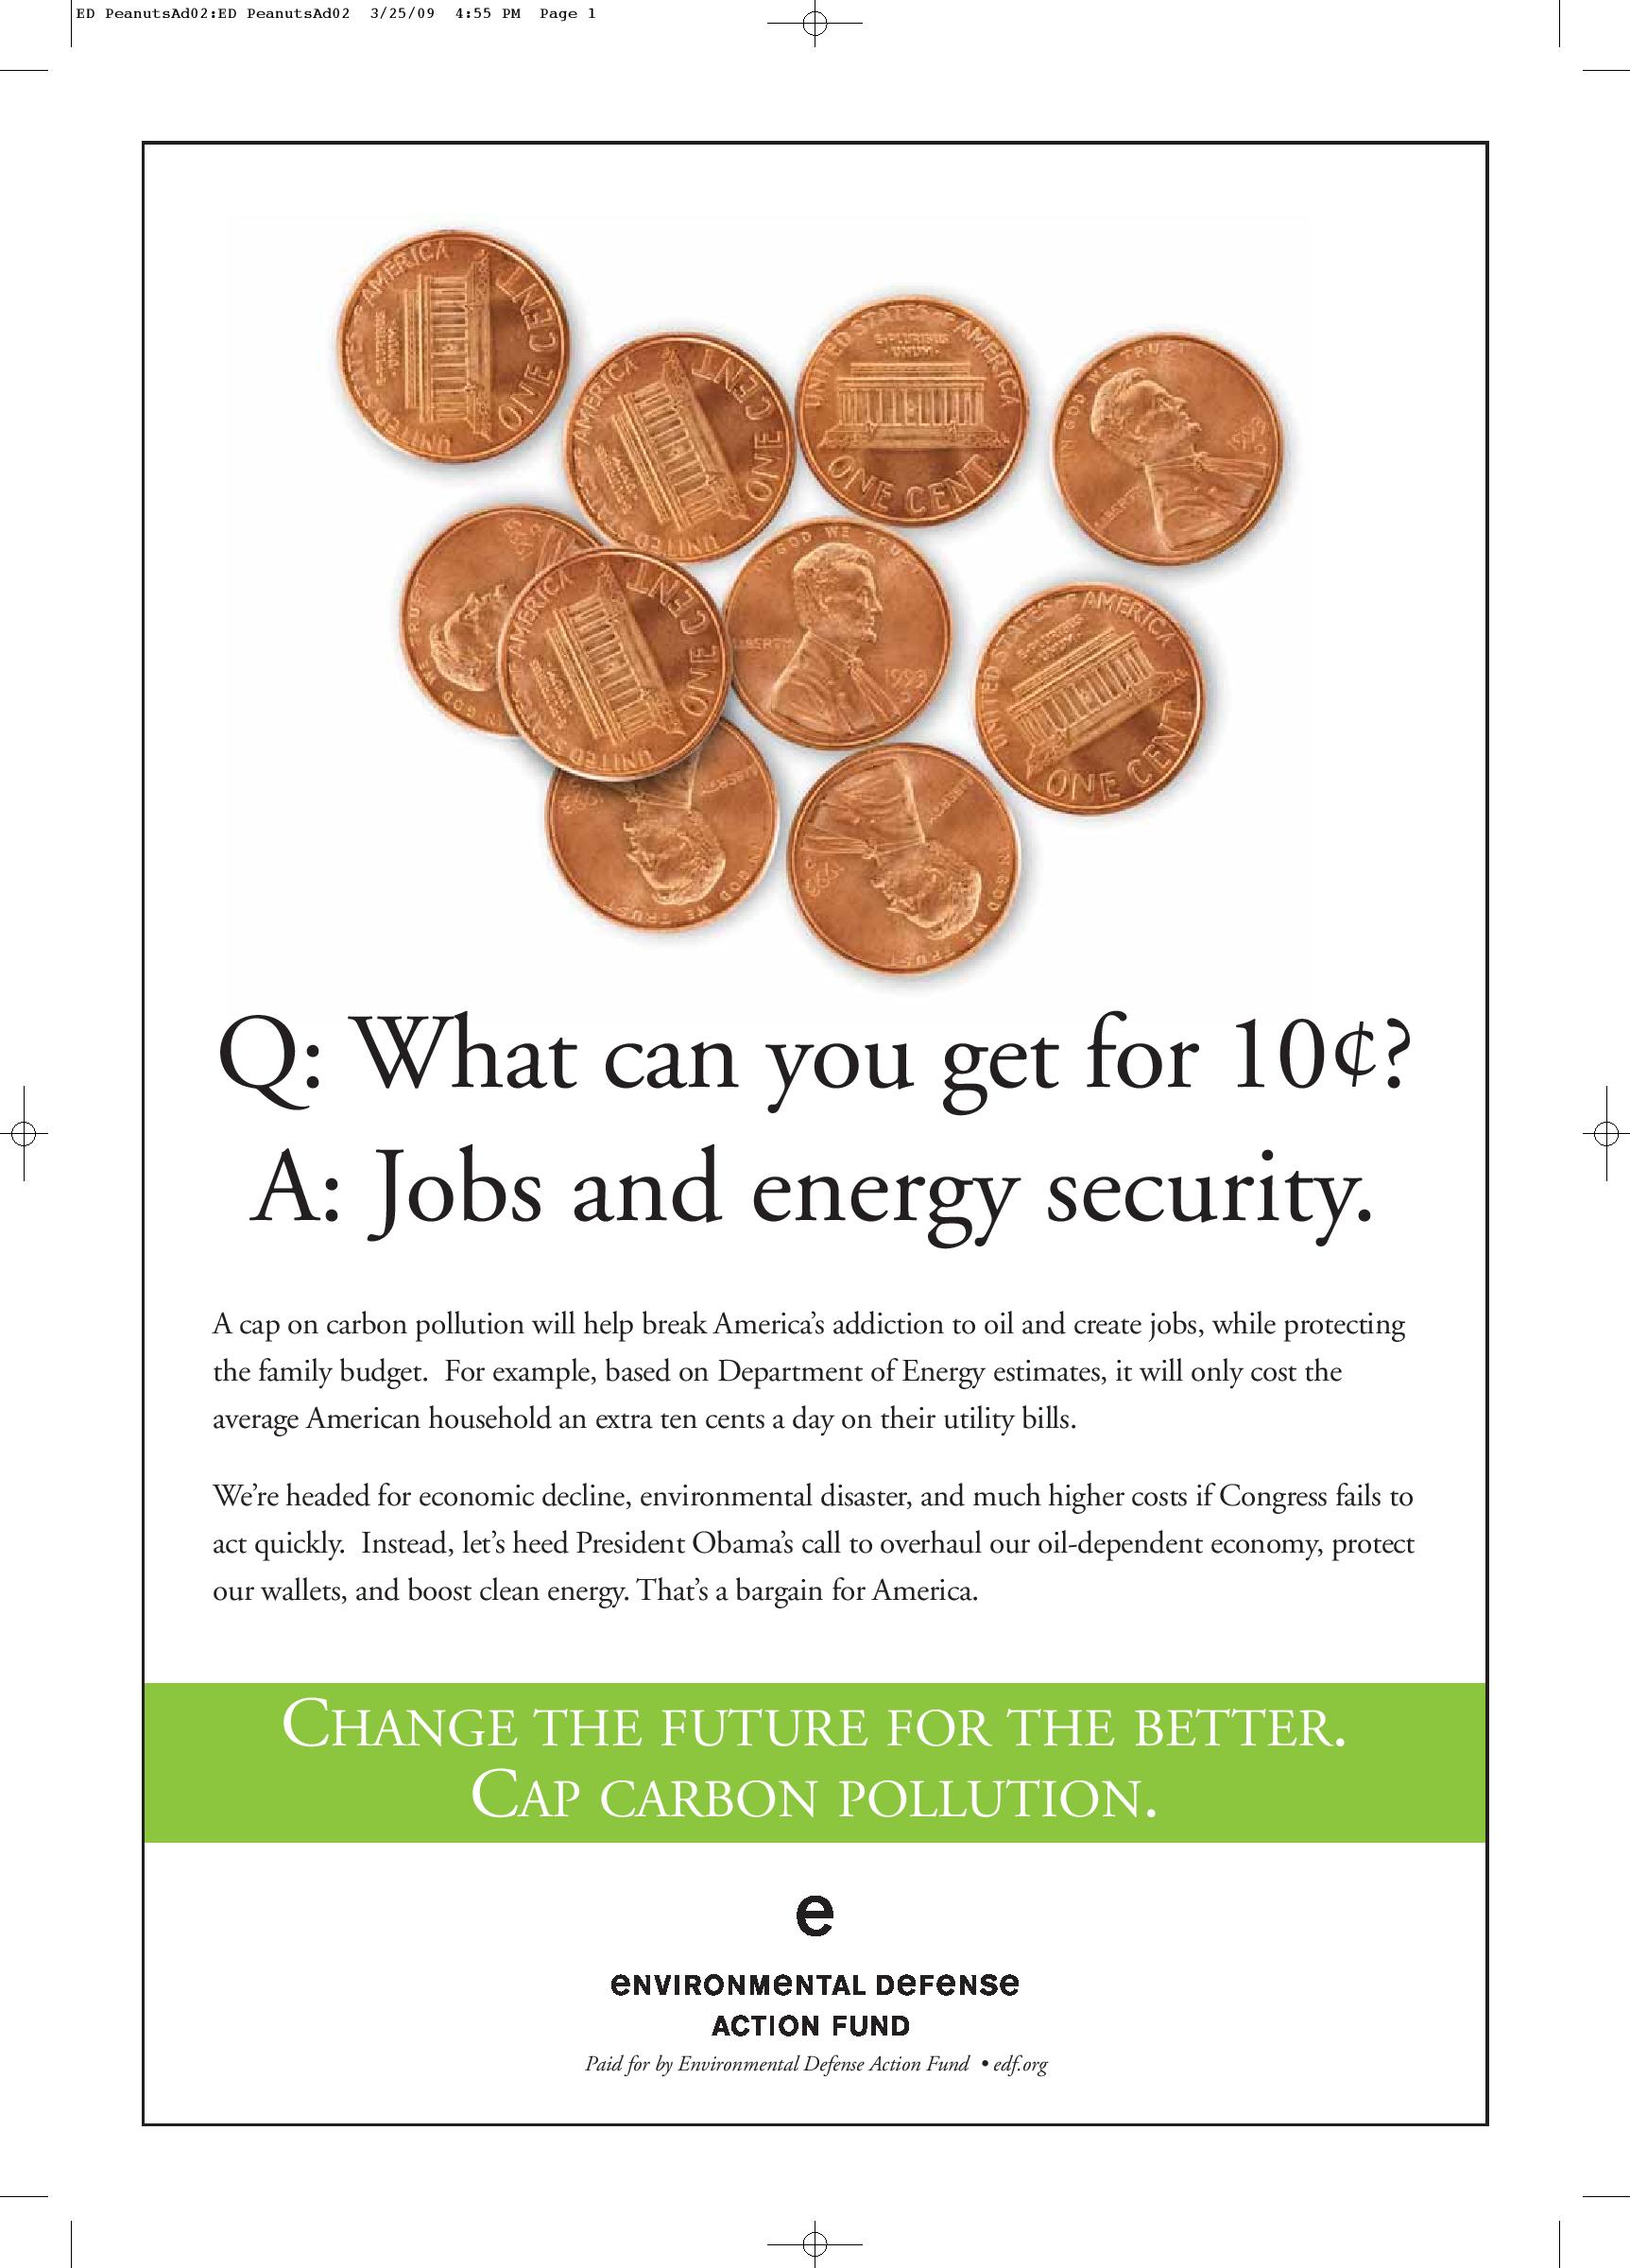 What can you get for 10 cents?